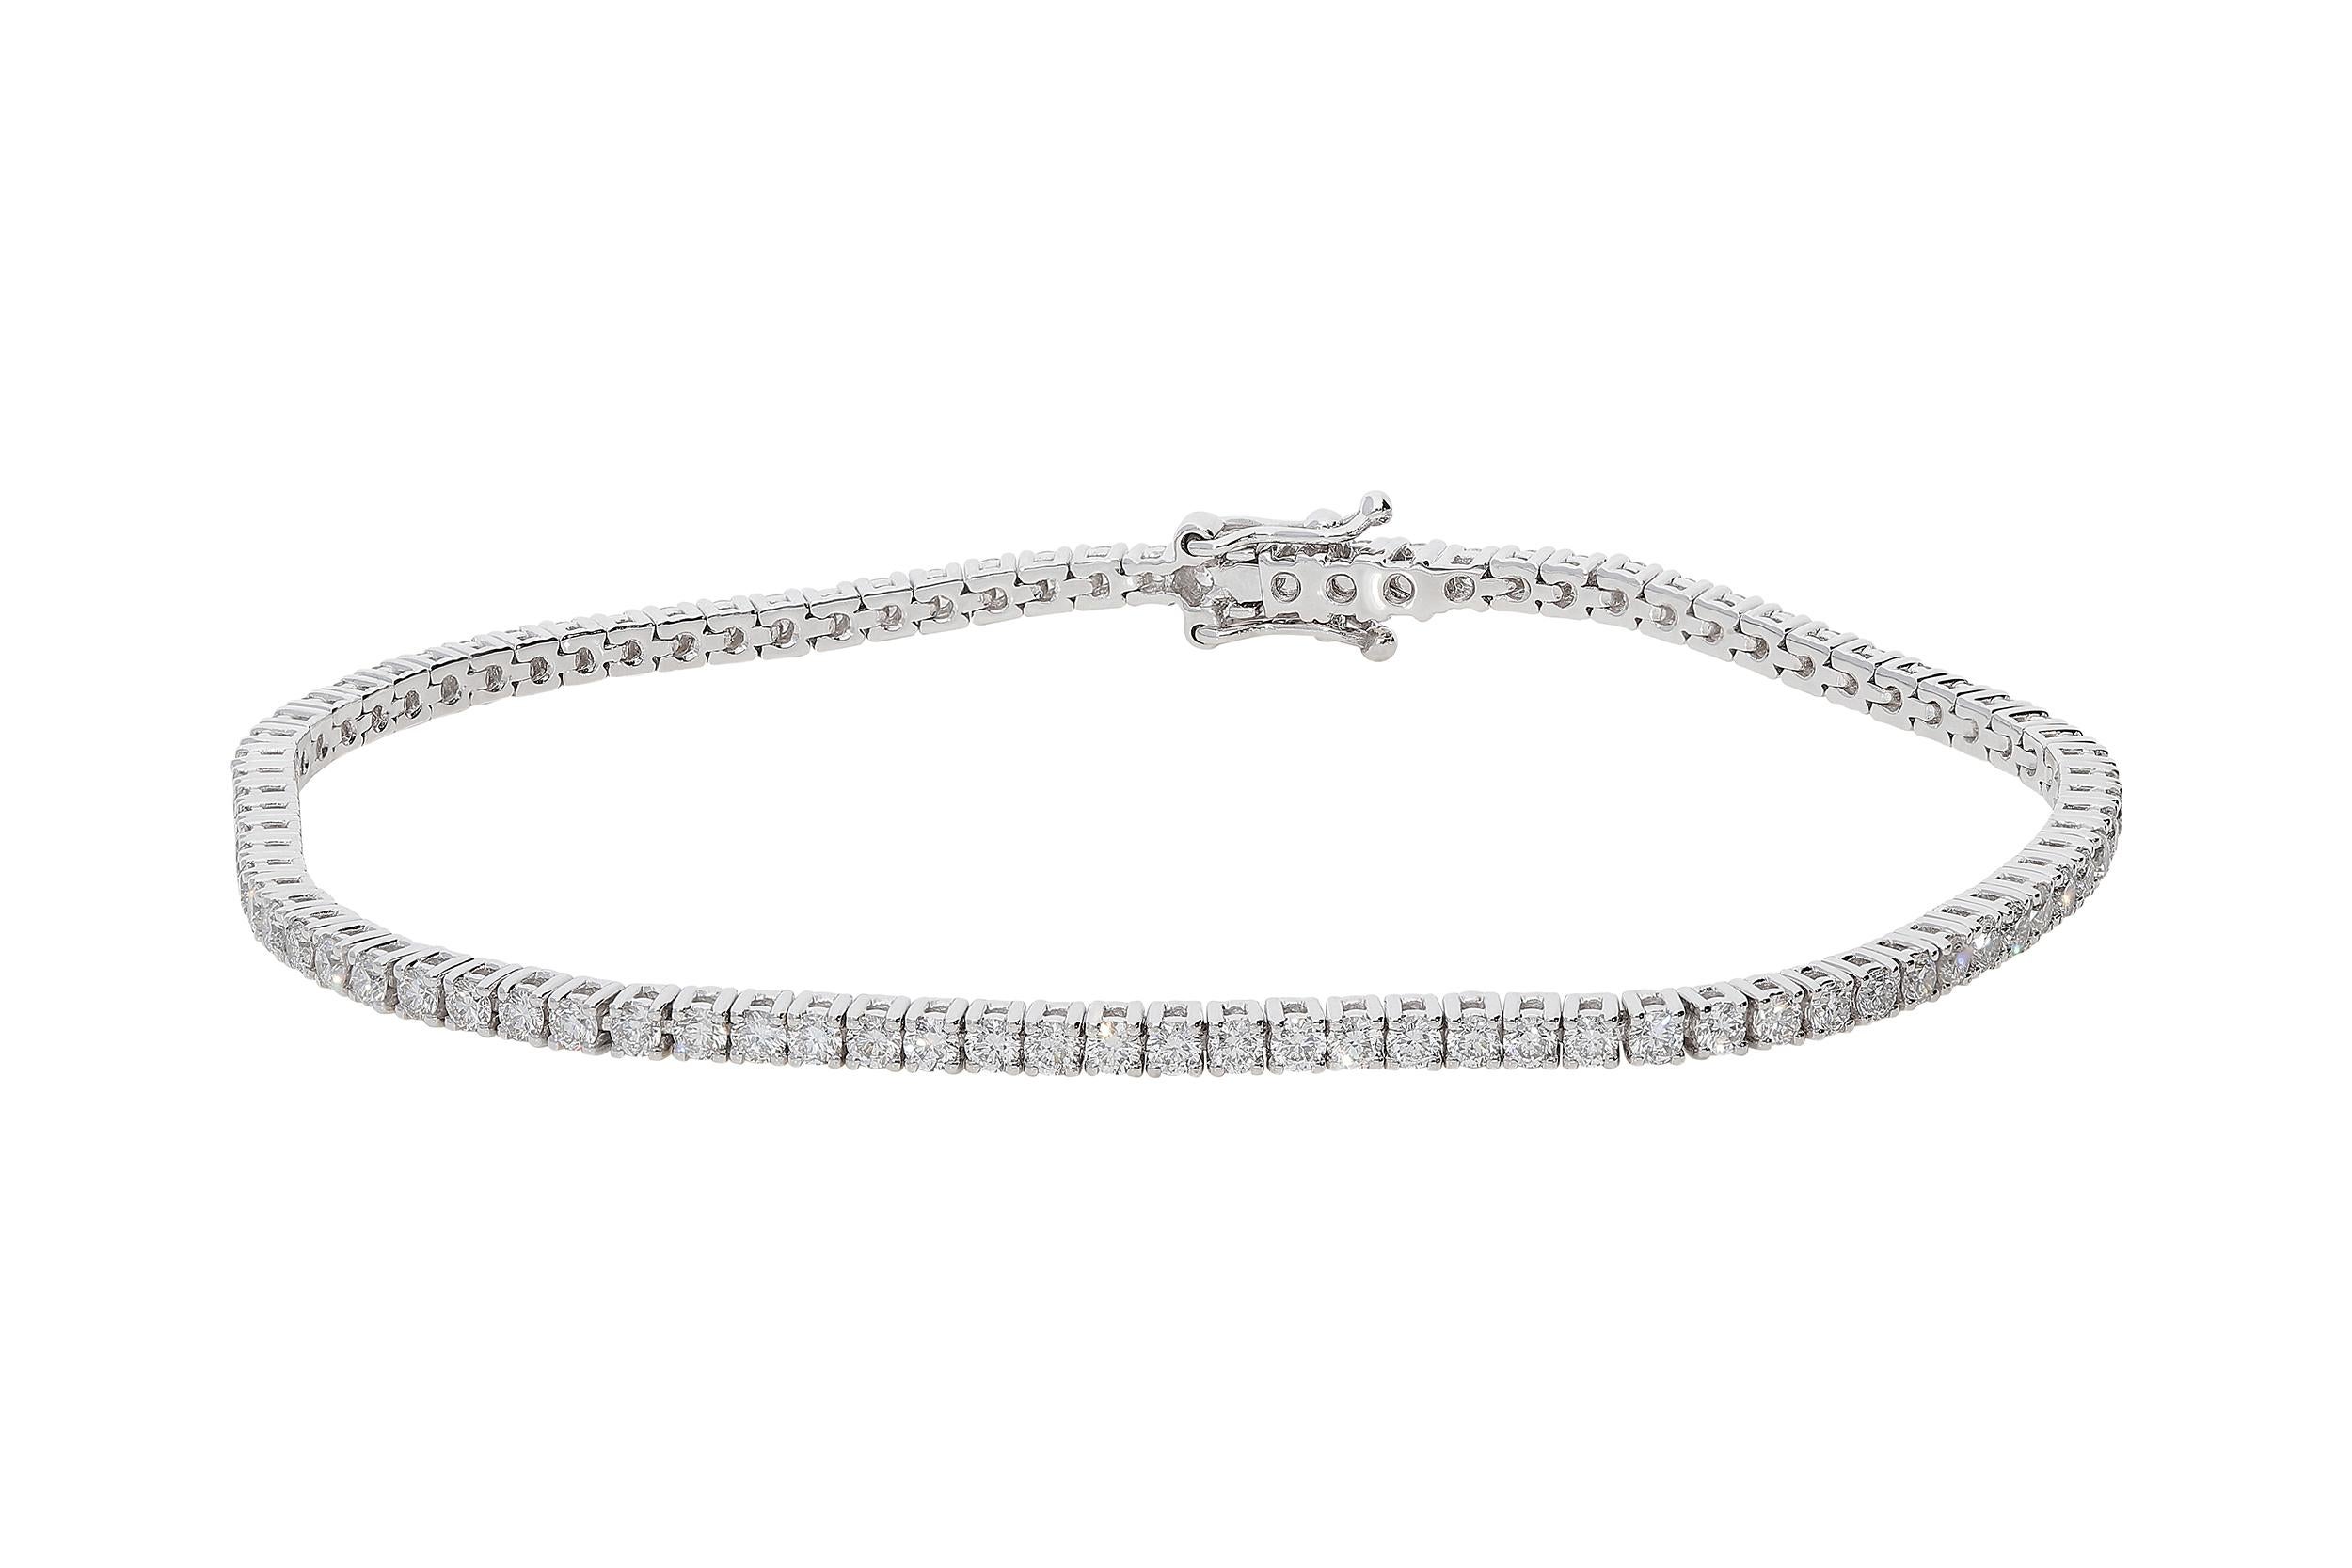 Tennis bracelet in 18kt white gold for a weight of 7,70 grams and white round brilliant diamonds color G clarity VS for 2,10 carats. The length is 17.50 centimeters and the width is 2.20 millimeters. Double safety eight on sides completes the